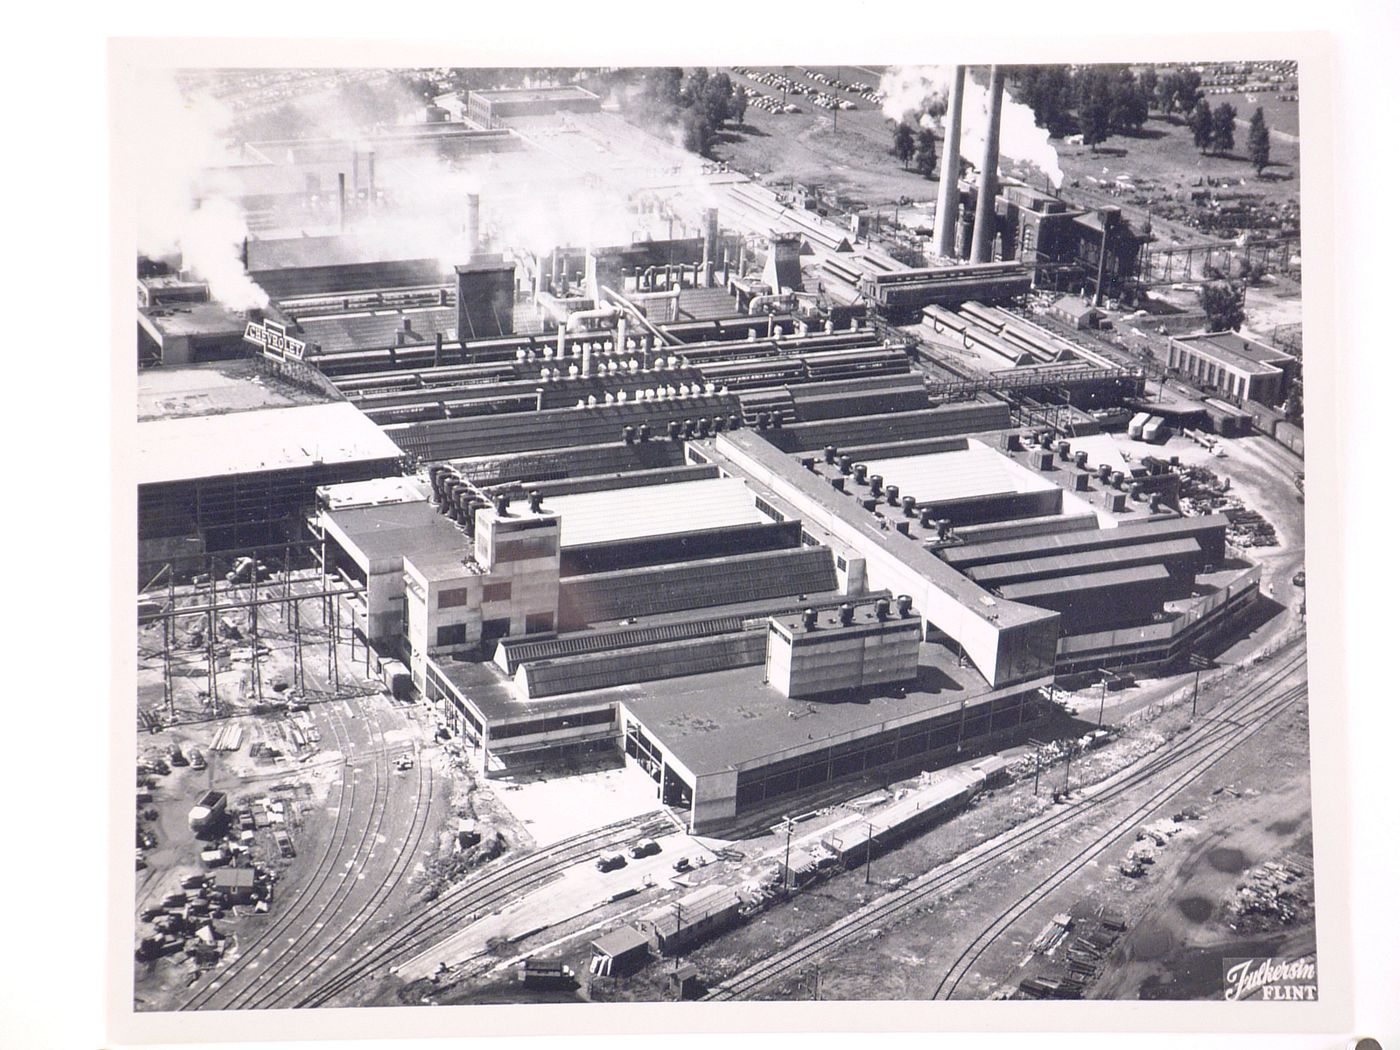 Aerial view of the Automobile Assembly Plant, General Motors Corporation Chevrolet division, Saginaw, Michigan